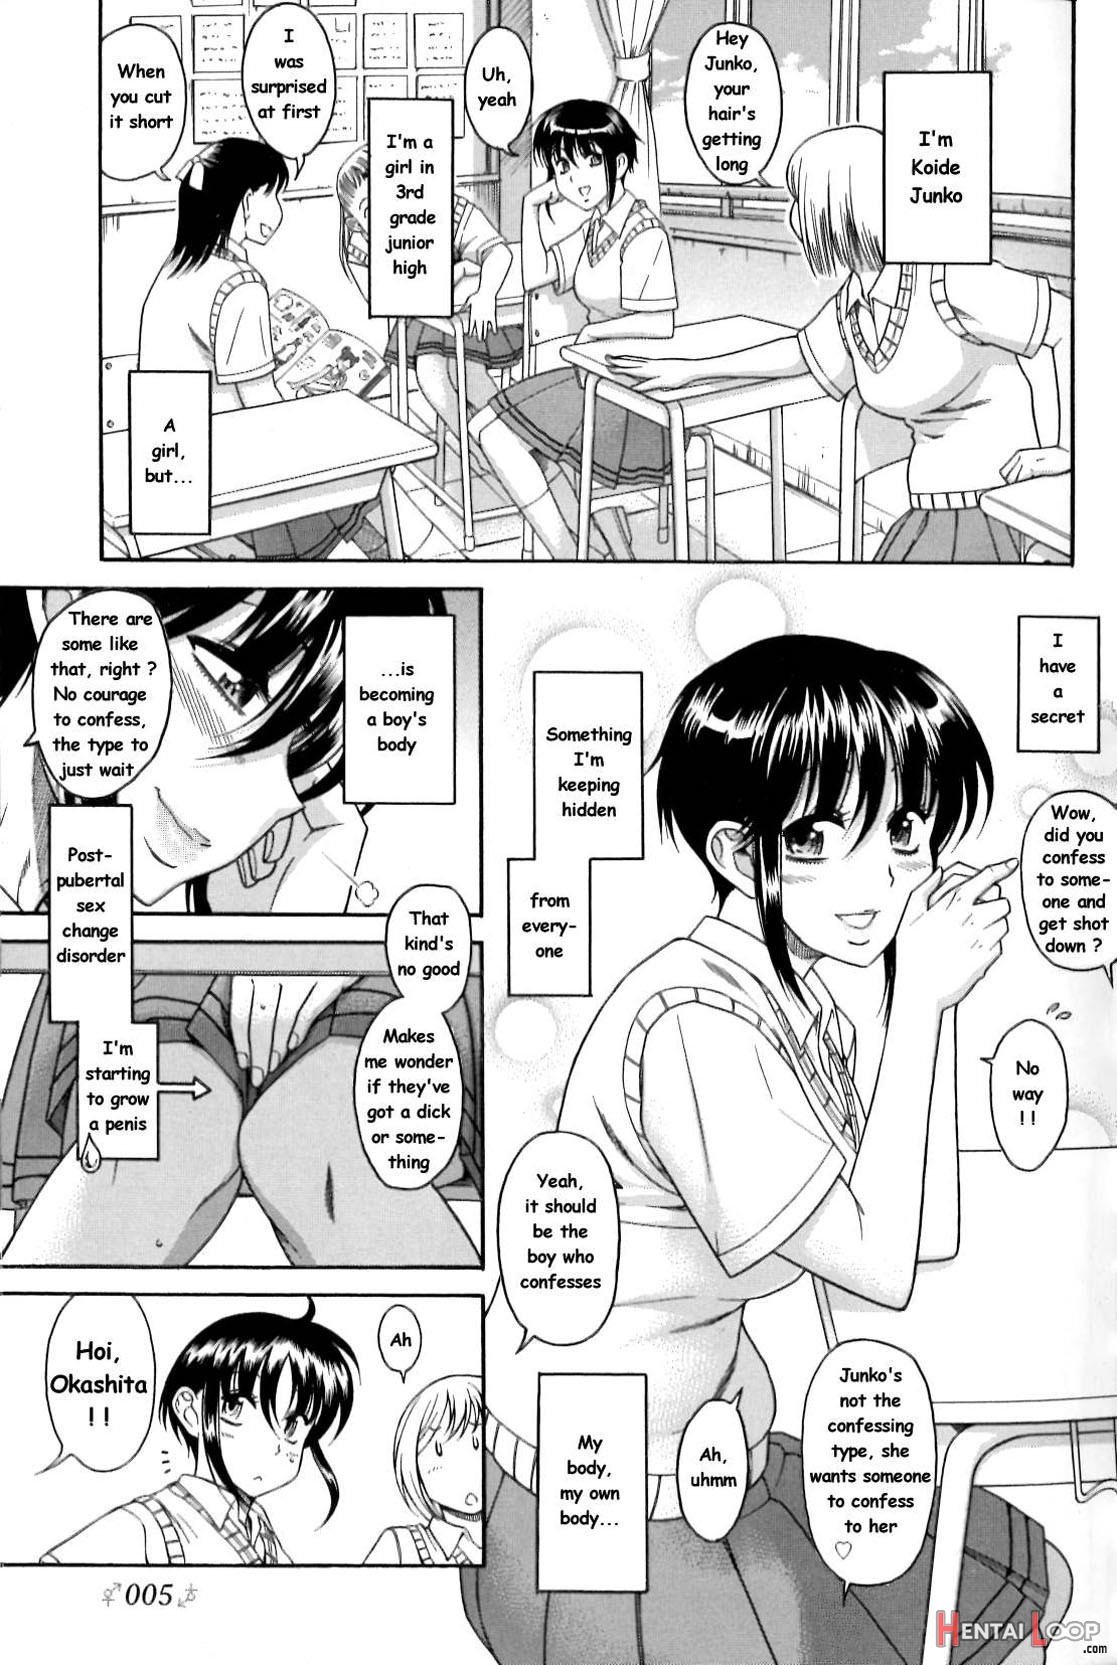 Boy Meets Girl, Girl Meets Boy 2- Single Page Version page 5